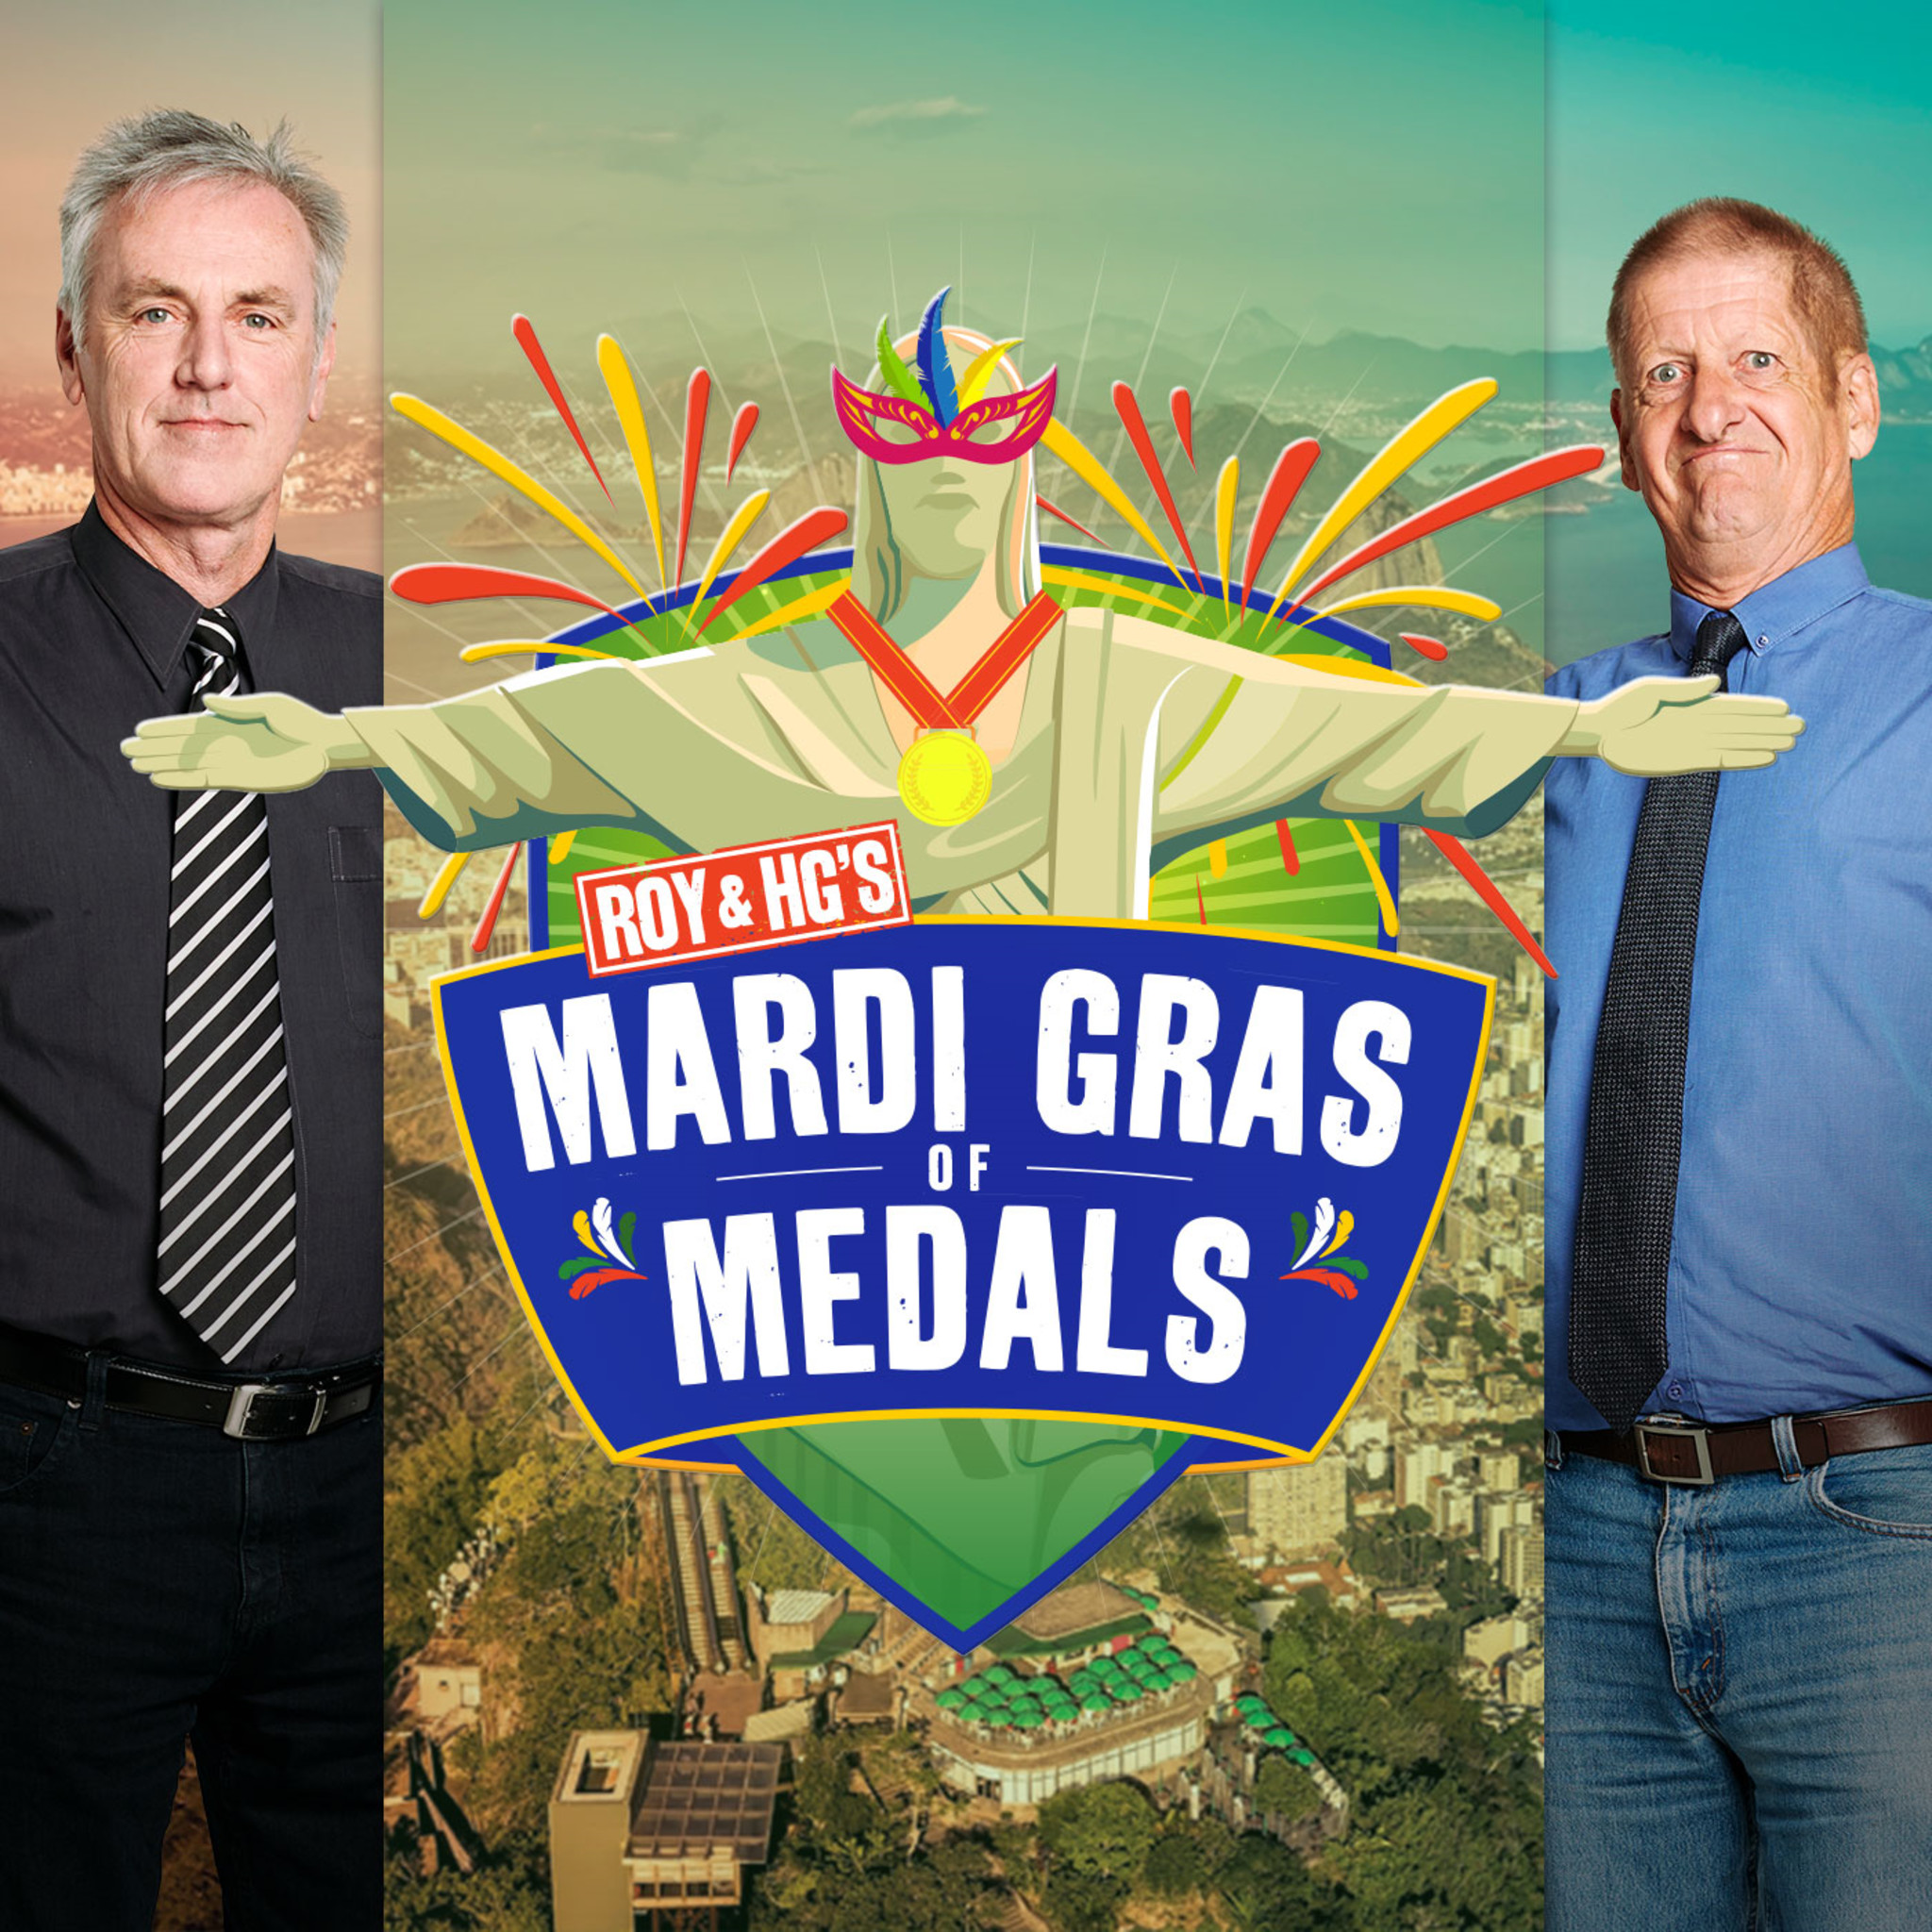 Roy and HG’s Mardi Gras of Medals